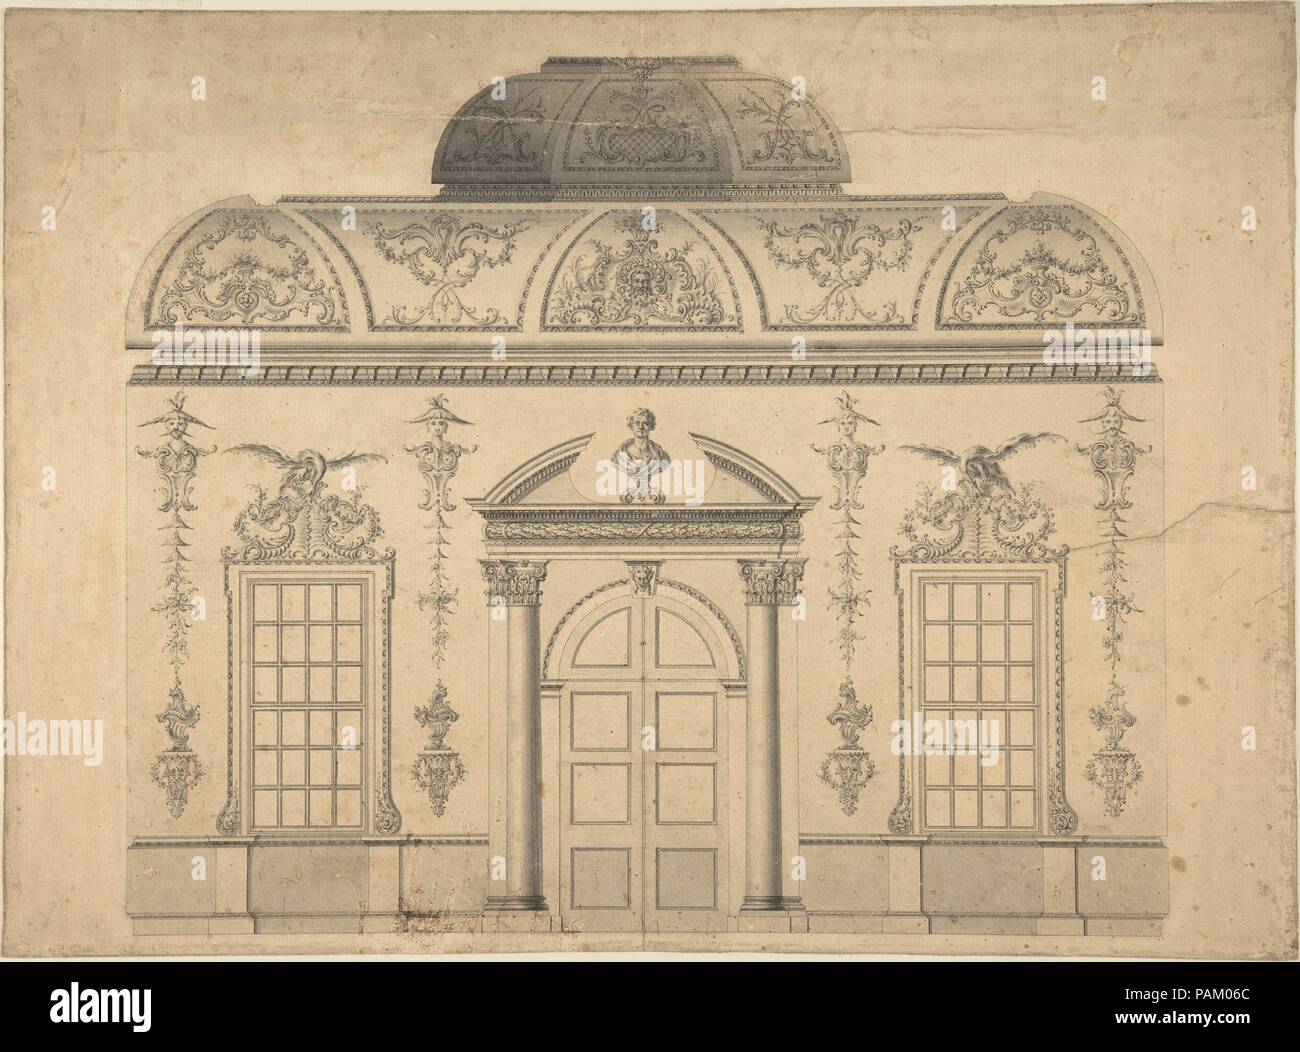 Design For The Decoration Of The Window Door Wall Of A Rococo Room